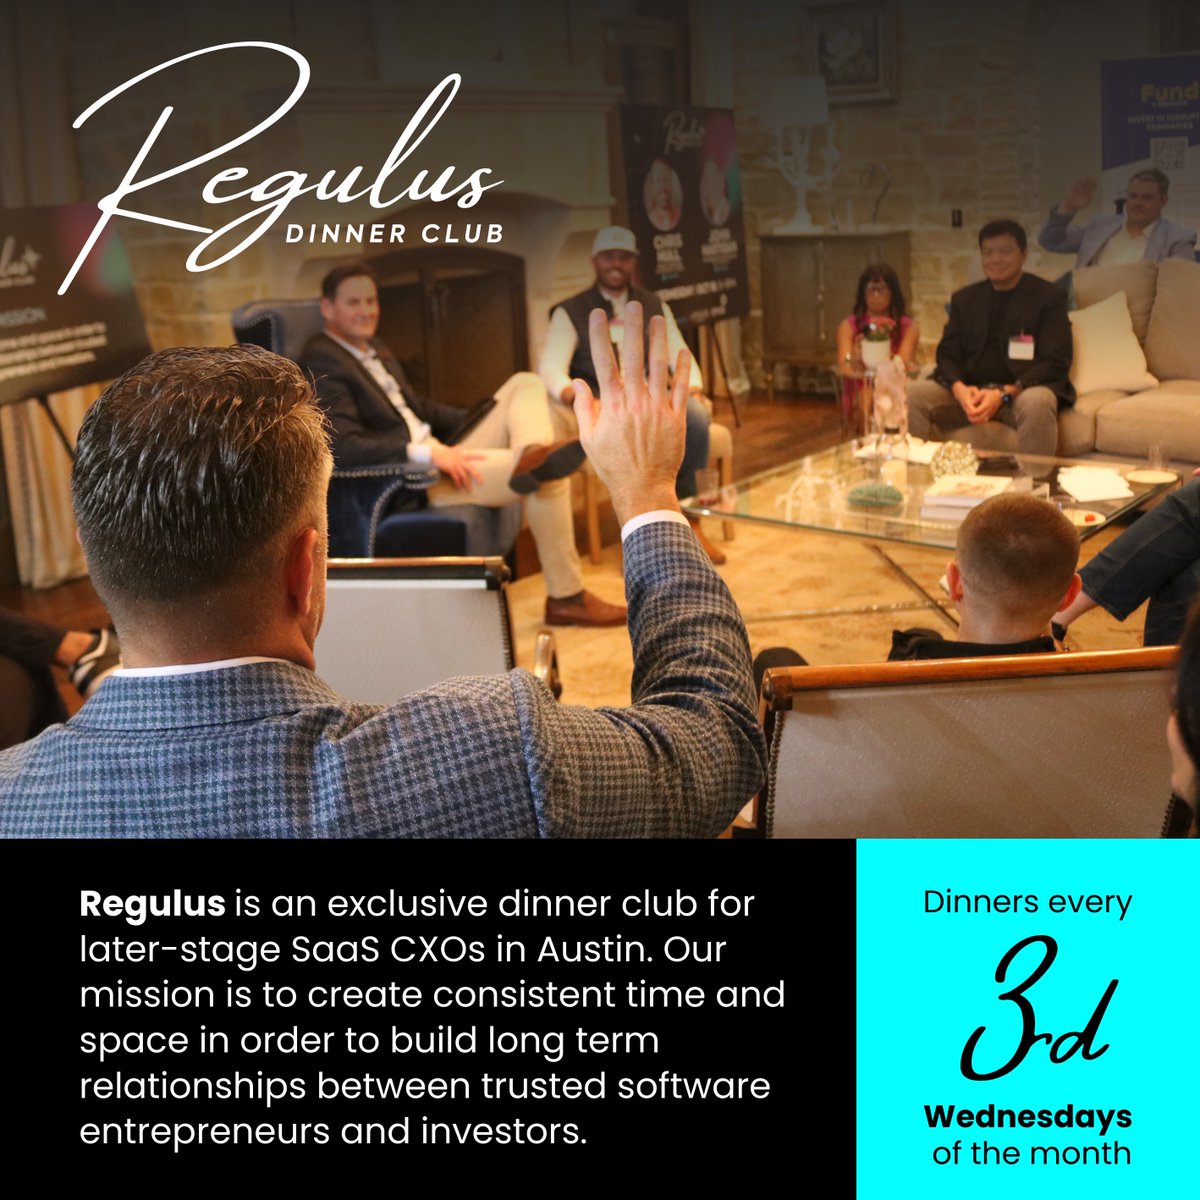 Step into the celestial realm of Regulus: where SaaS CXOs in Austin unite under starlit skies.  Join our exclusive dinner club, forging bonds between visionary entrepreneurs and investors. 🚀
.
.
.
#RegulusDinnerClub #SaaS #AustinTech #TechLuminaries
#CosmicConnections